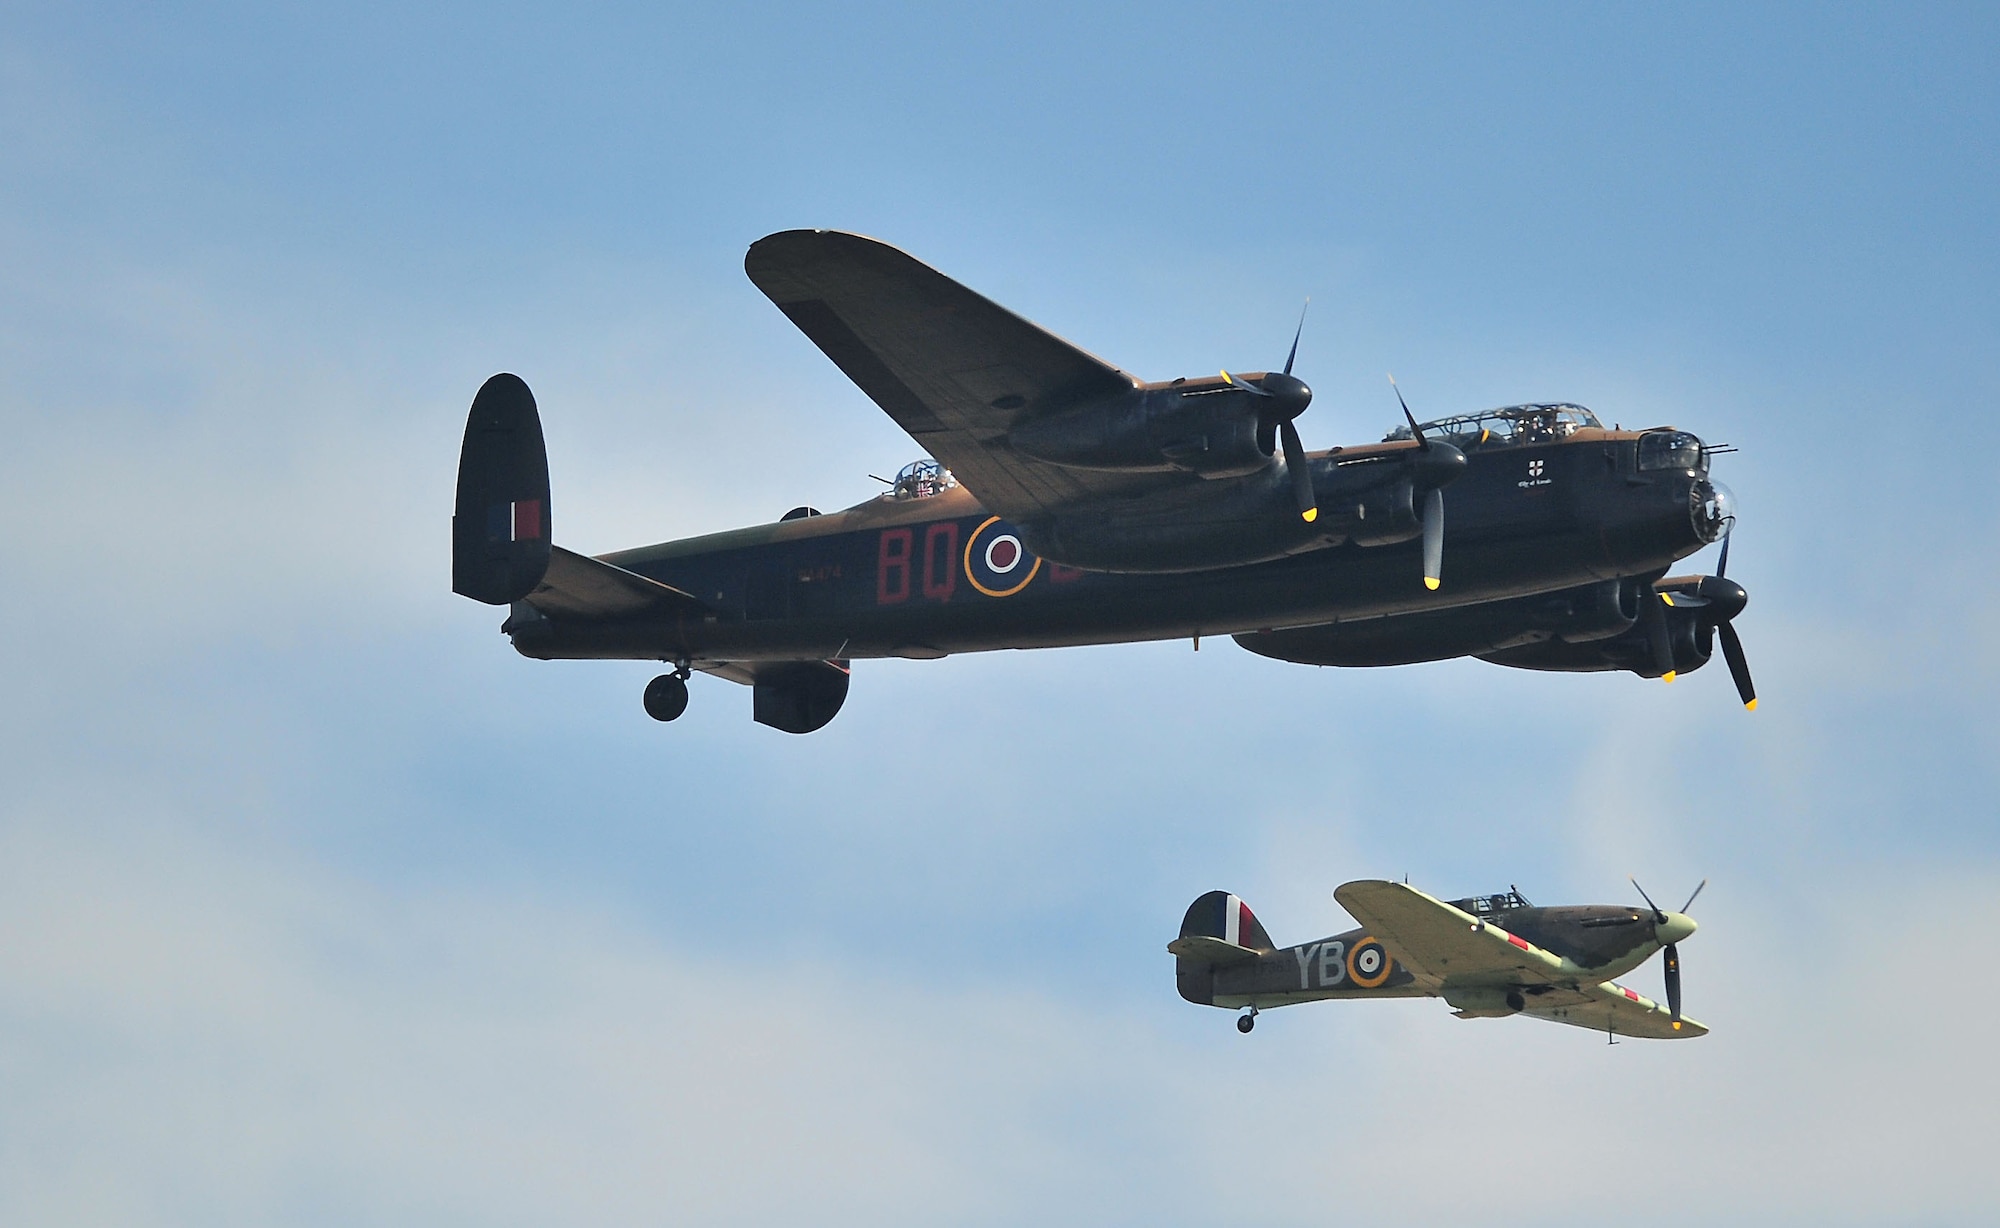 An Avro Lancaster and a DHC-1 Chipmunk fly in the Battle of Britain dedication formation during the Duxford Air Show at village in Cambridgeshire, England Sept.3. During World War II, Americans joined the Royal Air Force to help the allied powers in a fight against the axis powers, before America officially entered into the war Dec. 7, 1941. One of the many training locations in England, Duxford was later used by the United States Army Air Force to launch B-17 attacks on Germany. (U.S. Air Force photo by Senior Airman Marissa Tucker)